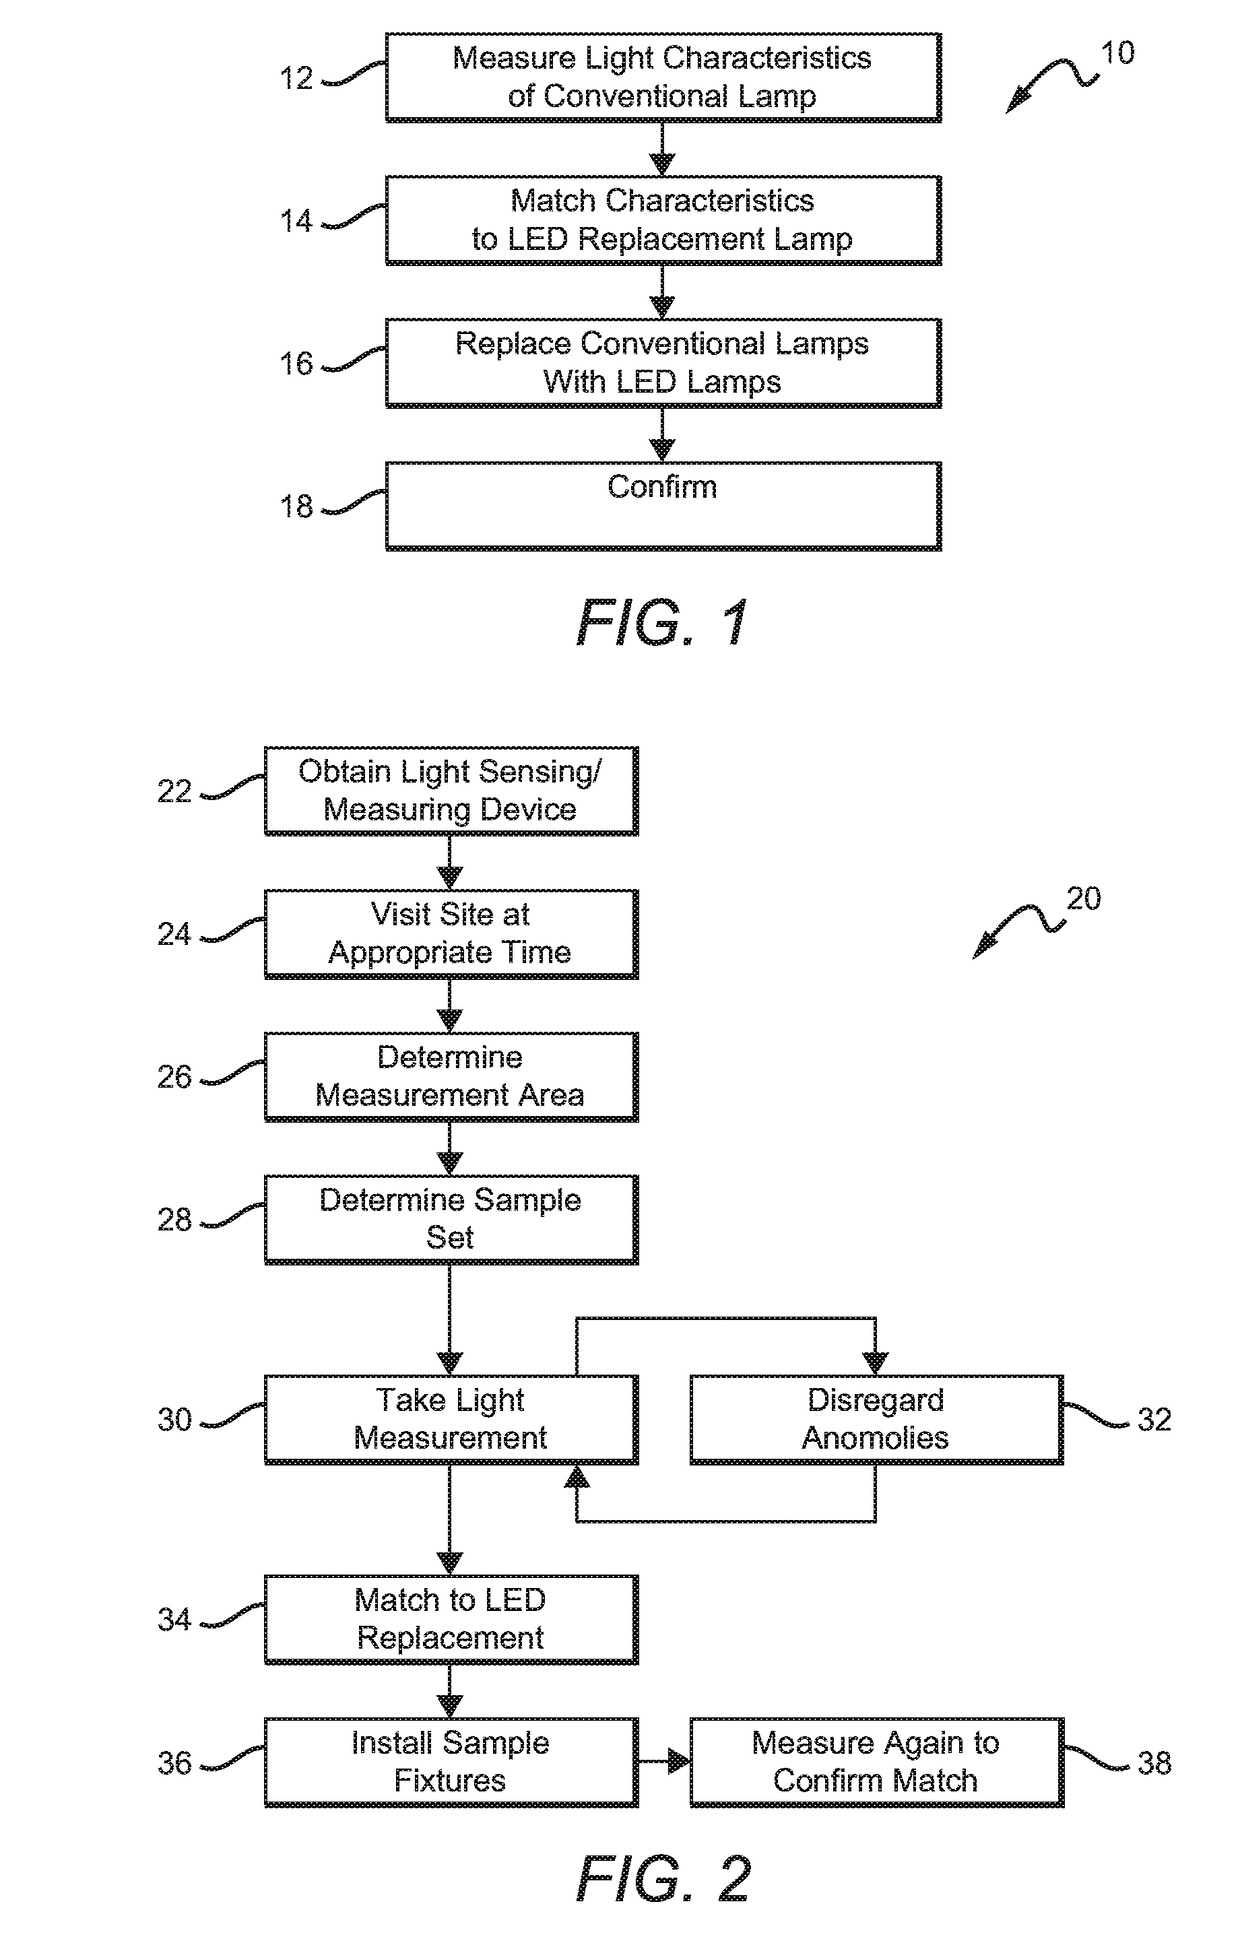 Method for measuring light for LED replacement